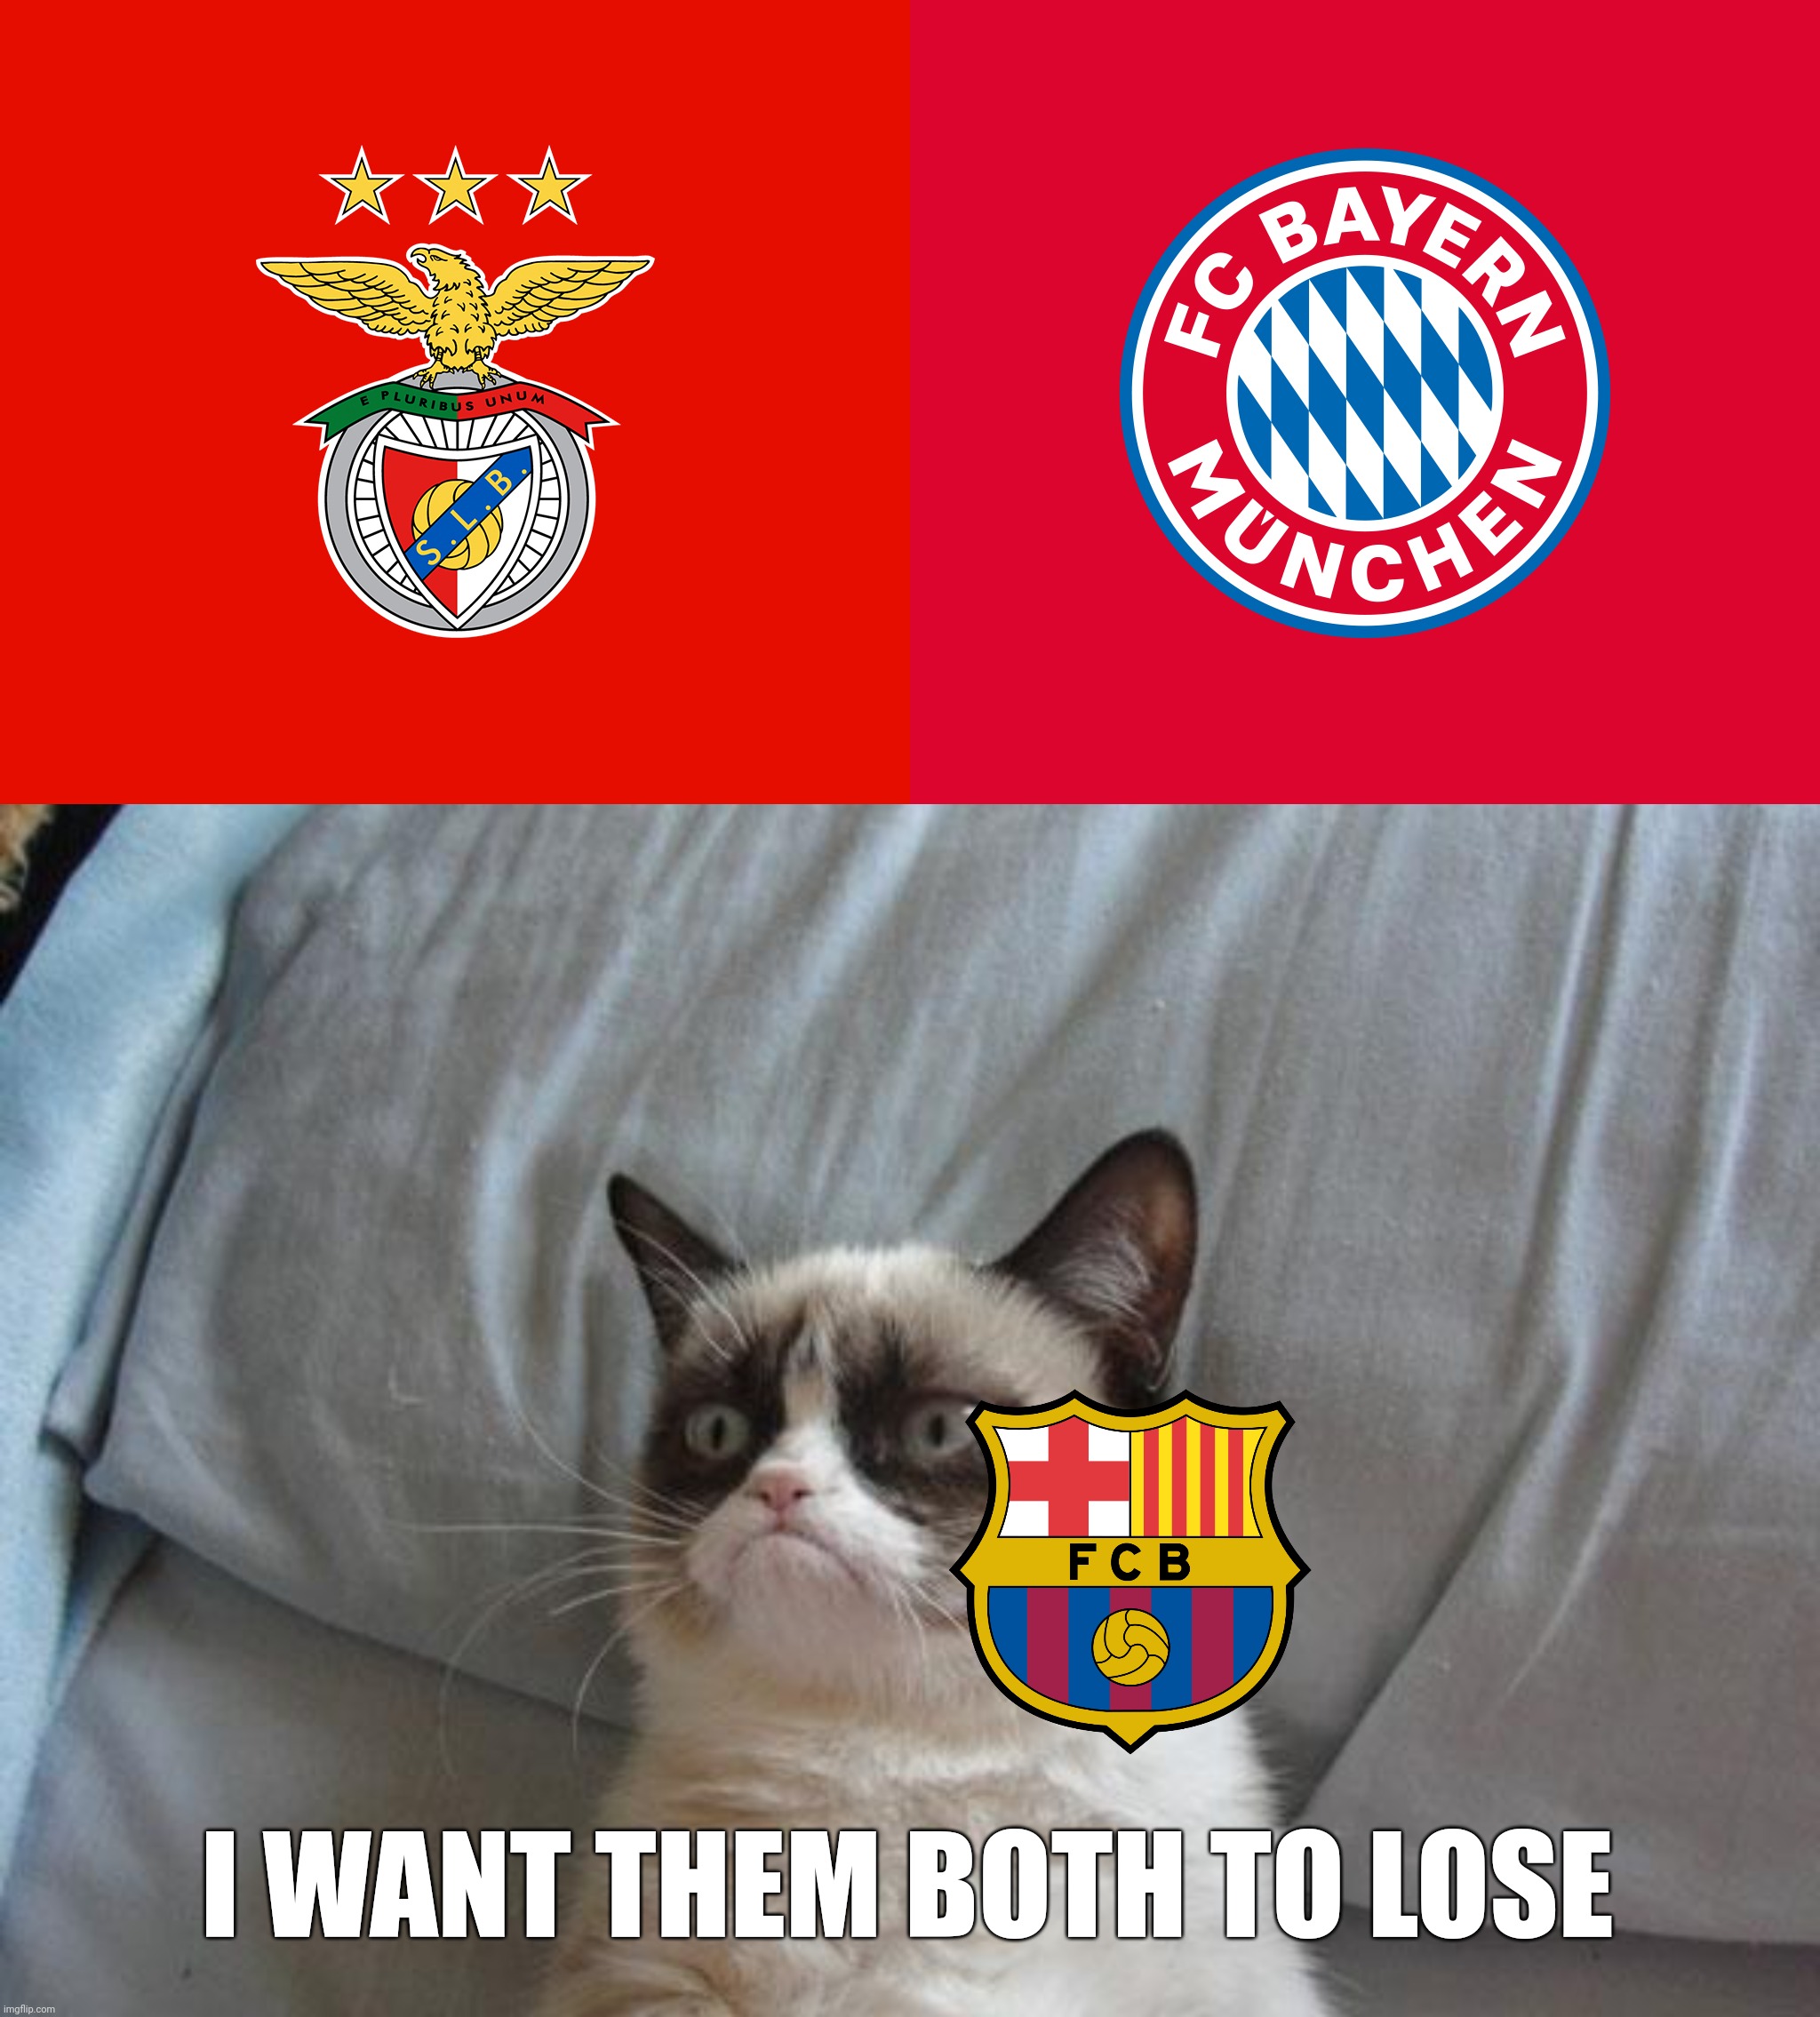 Benfica - Bayern Munich. Wednesday at 21:00 live on DAZN | I WANT THEM BOTH TO LOSE | image tagged in memes,grumpy cat bed,benfica,bayern munich,football,champions league | made w/ Imgflip meme maker